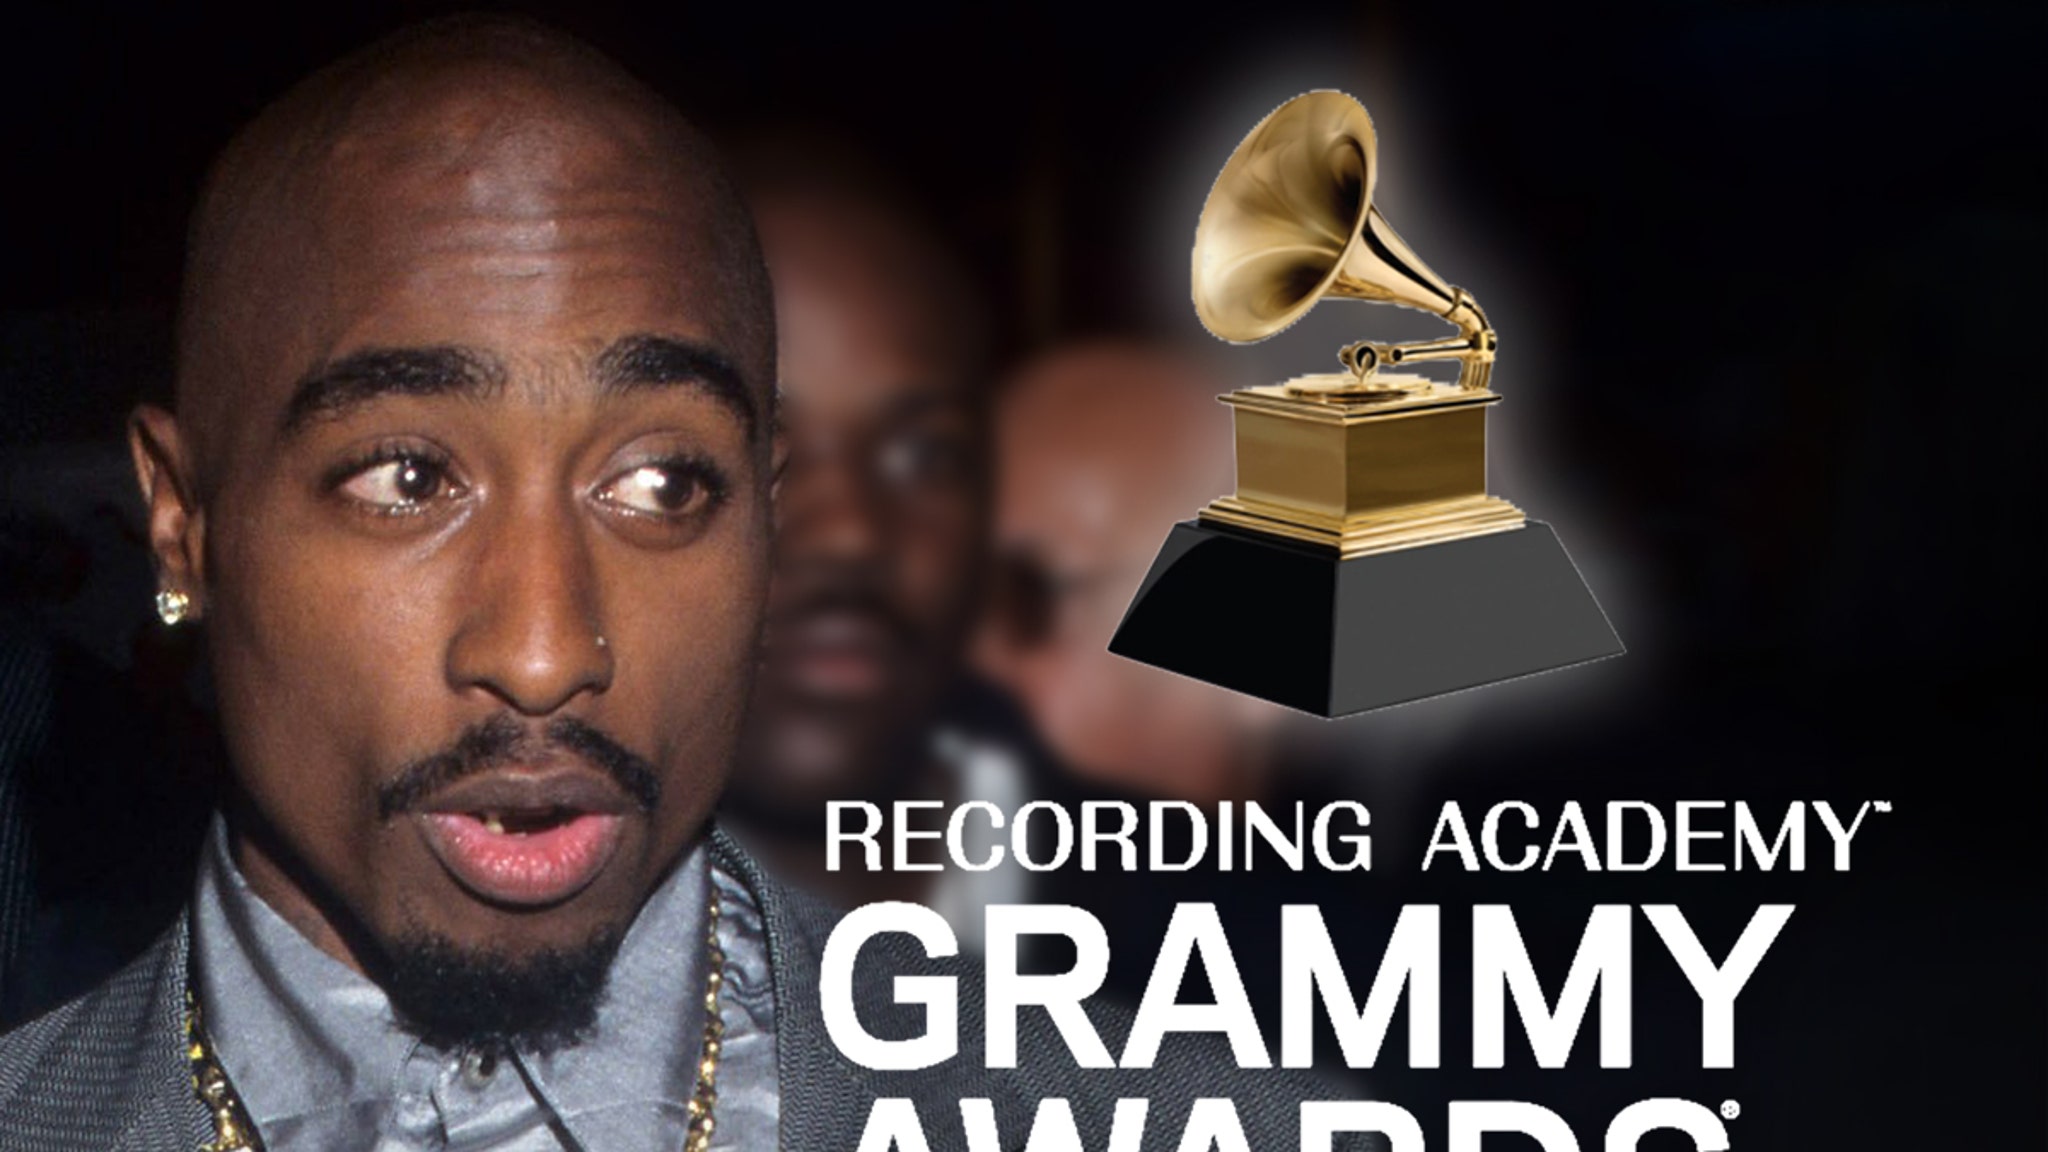 Tupac would be the team week in the Grammys drama, says brother